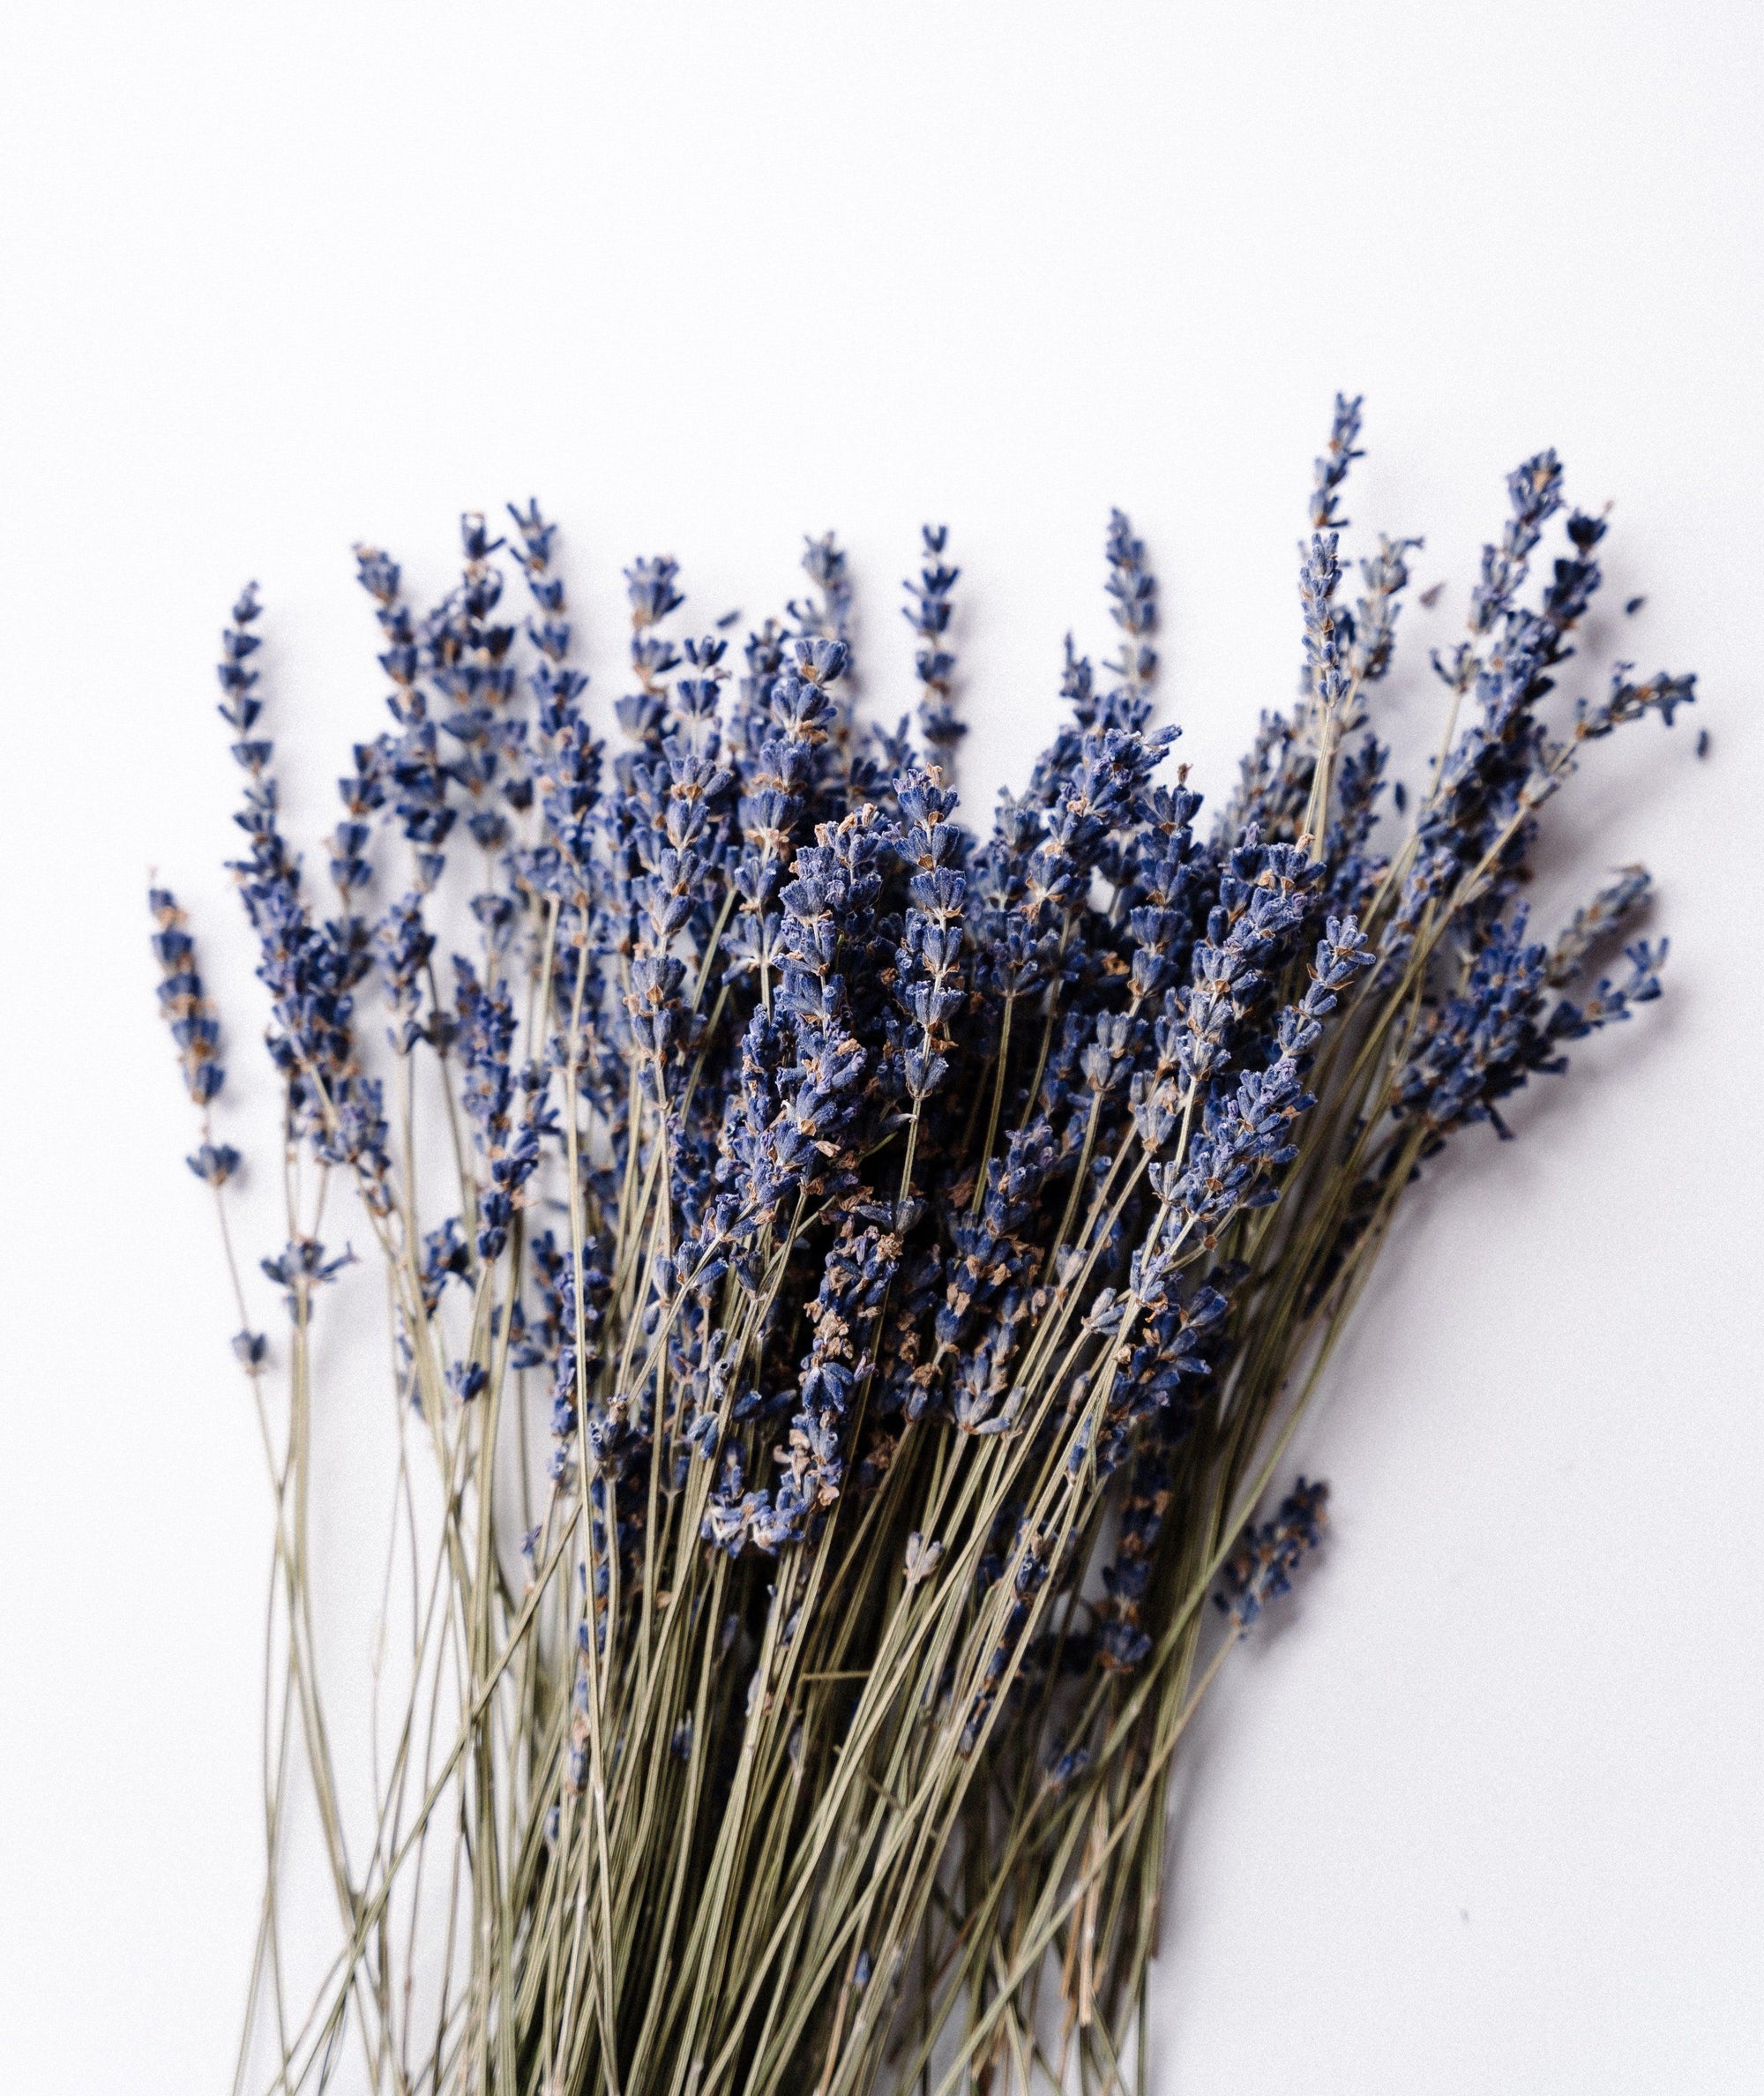 5 Reasons You Should Plant Lavender In Your Garden